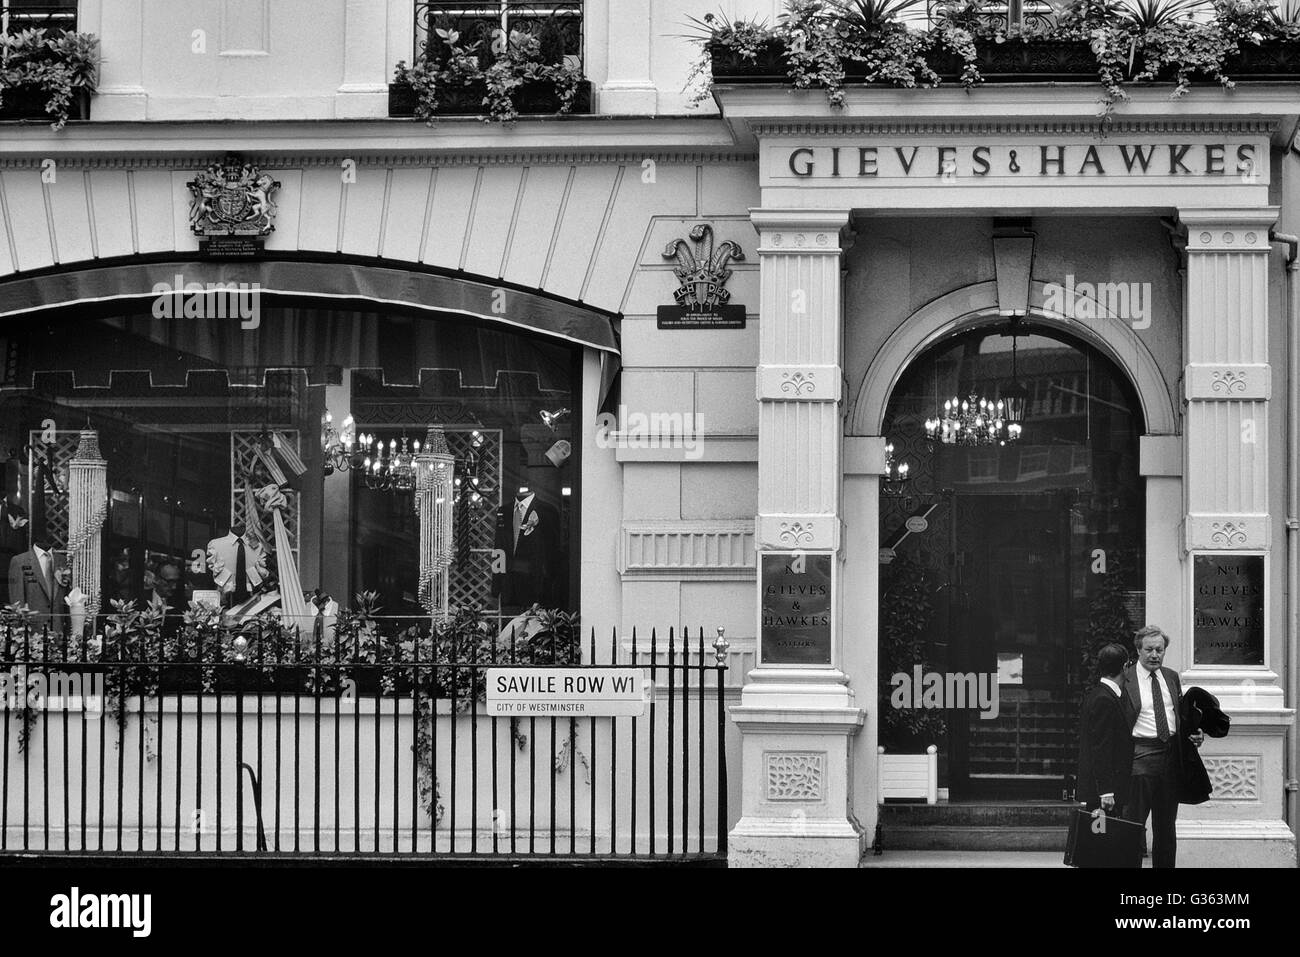 Gieves & Hawkes tailleurs. Savile Row. Londres. L'Angleterre. UK. L'Europe Banque D'Images